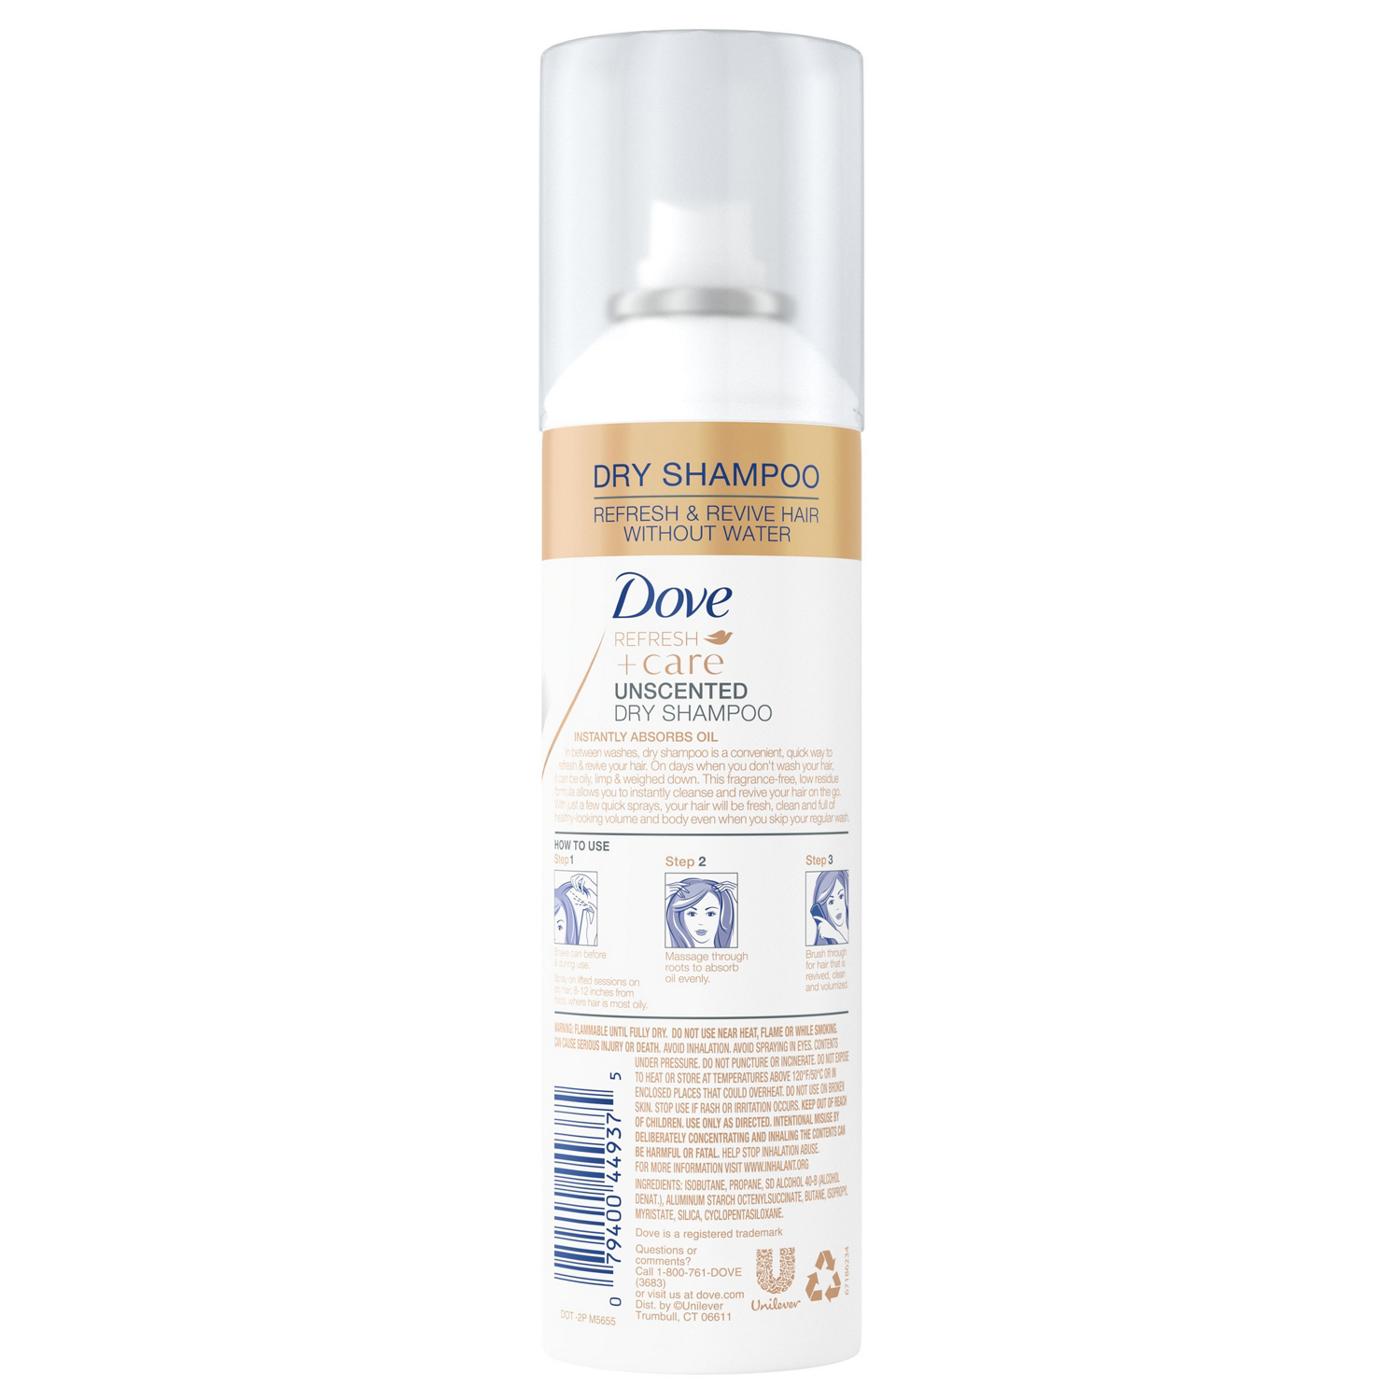 Dove Unscented Dry Shampoo; image 2 of 4